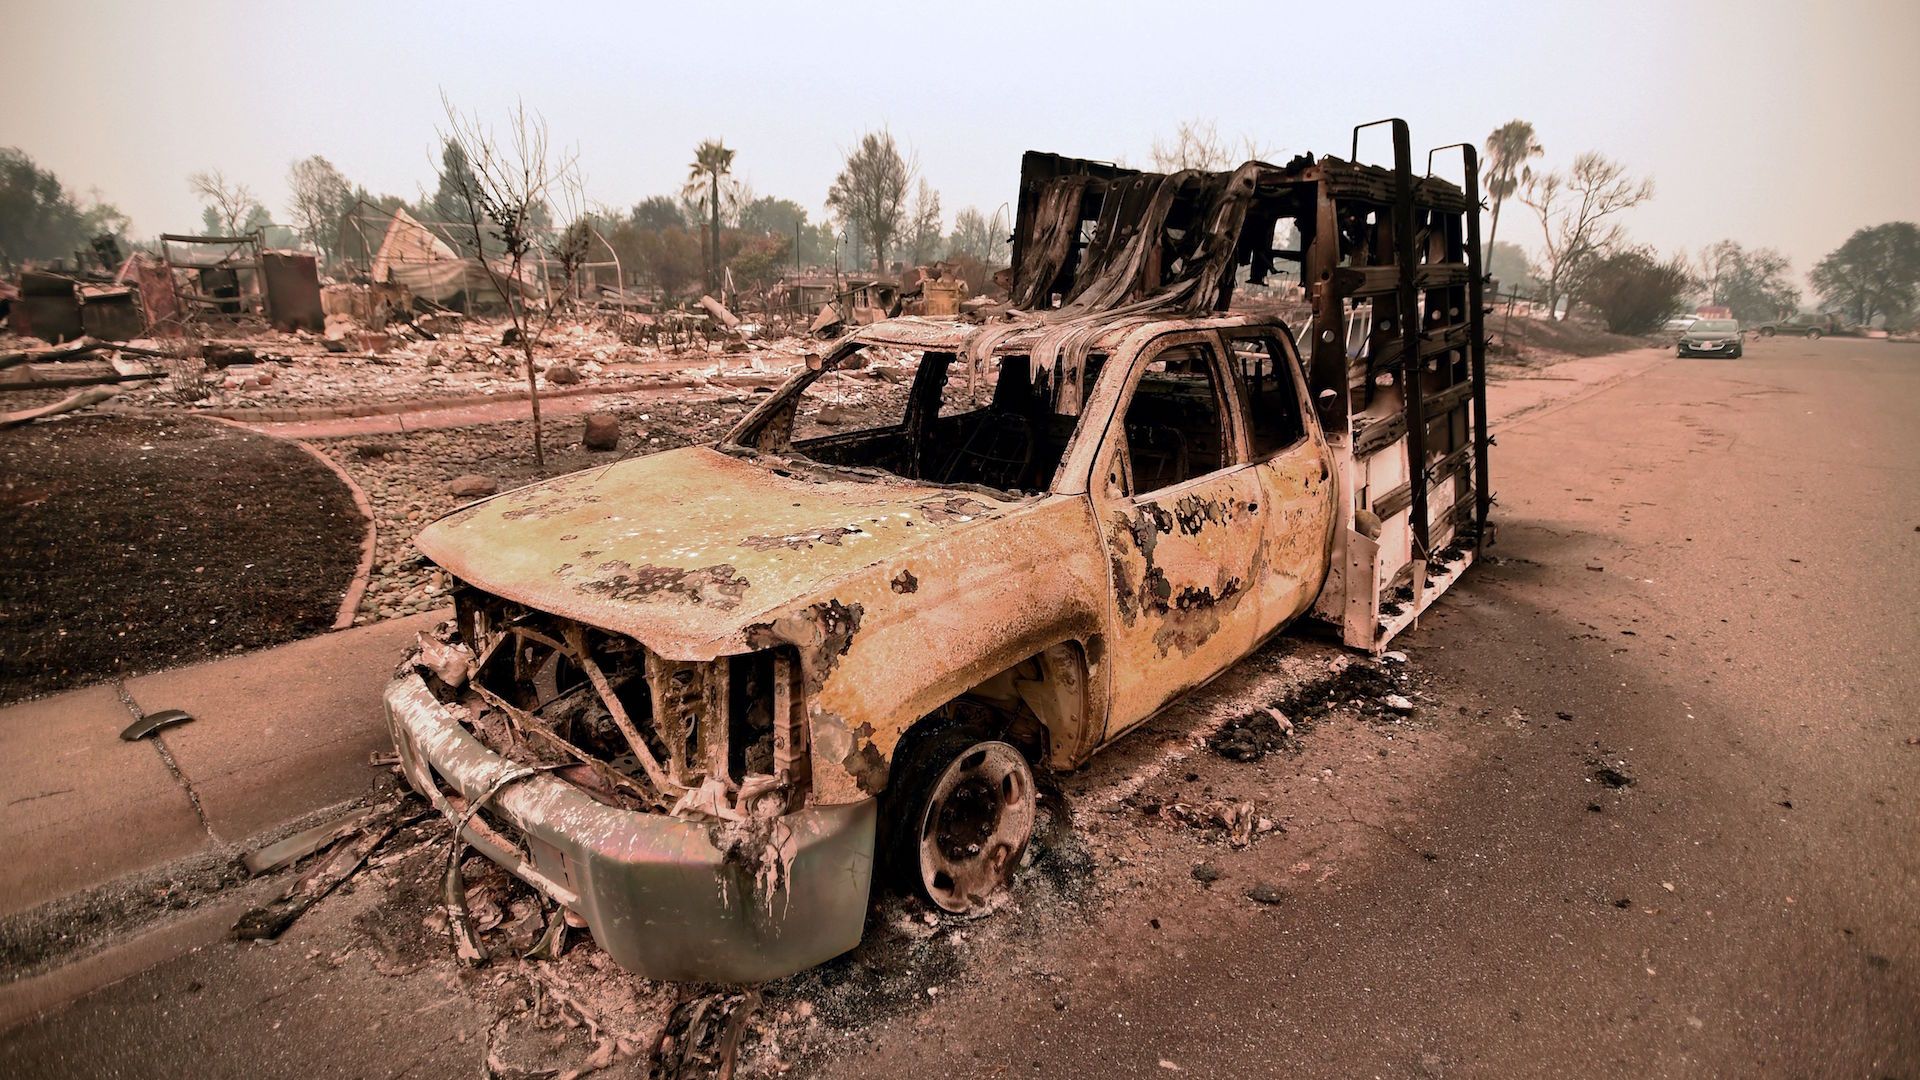 A destroyed truck is seen among the ruins of a burned neighborhood after the Carr fire passed through the area of Lake Keswick Estates near Redding, California on July 28, 2018.